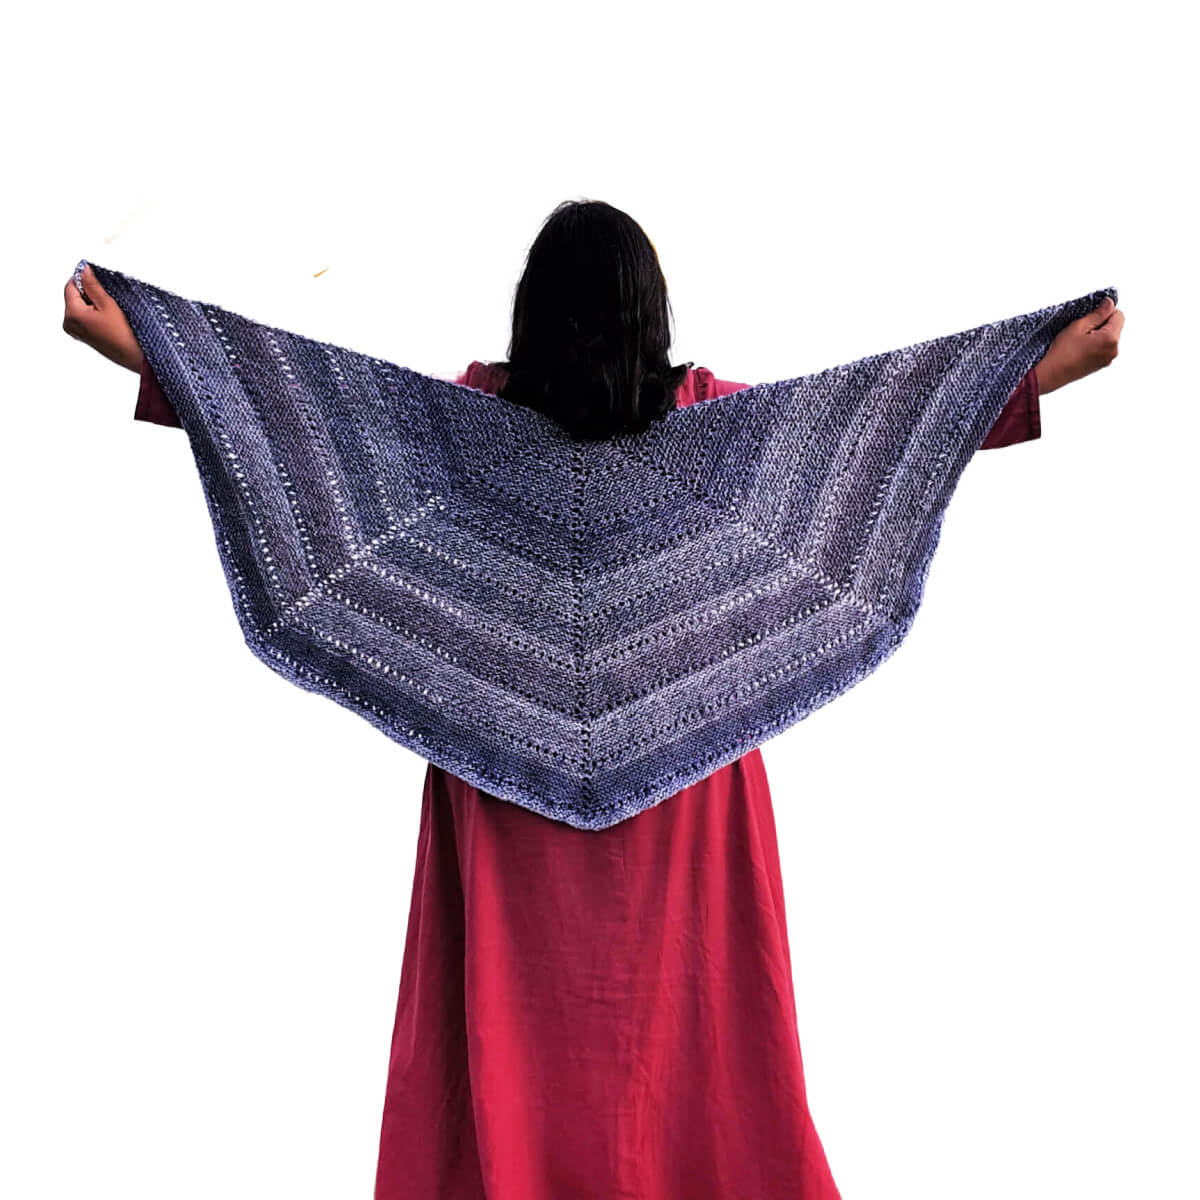 Back view of a woman in a red dress and a knit shawl made of 4 triangles connected to make 4/6 of a hexagon. The shawl is knit in garter stitch with a row of eyelets every few inches. The woman's arms are outstretched to the sides, holding the shawl so it can be clearly seen.